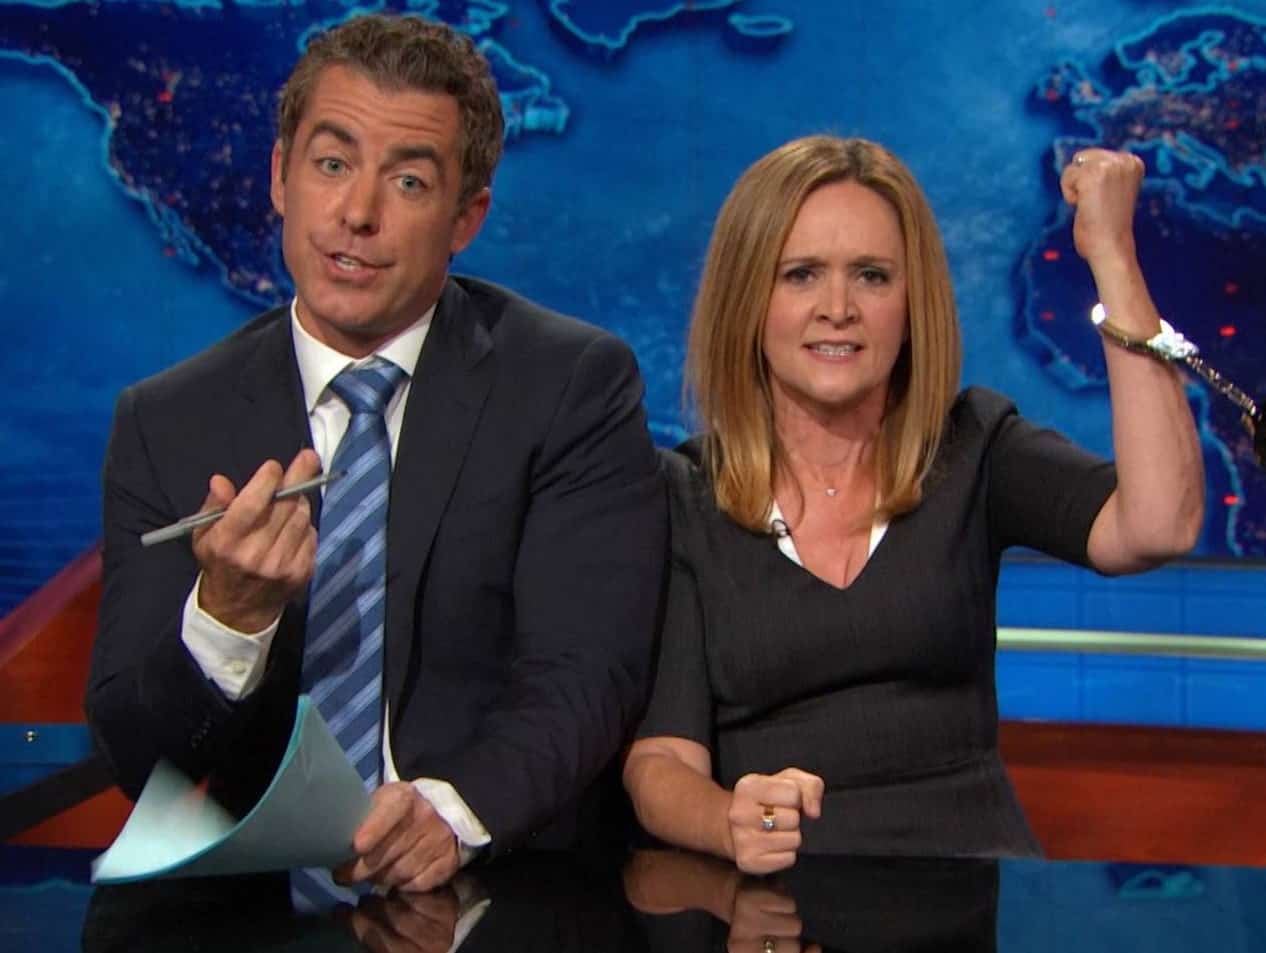 Samantha Bee joined "The Daily Show with Jon Stewart" as a correspondent on July 10, 2003